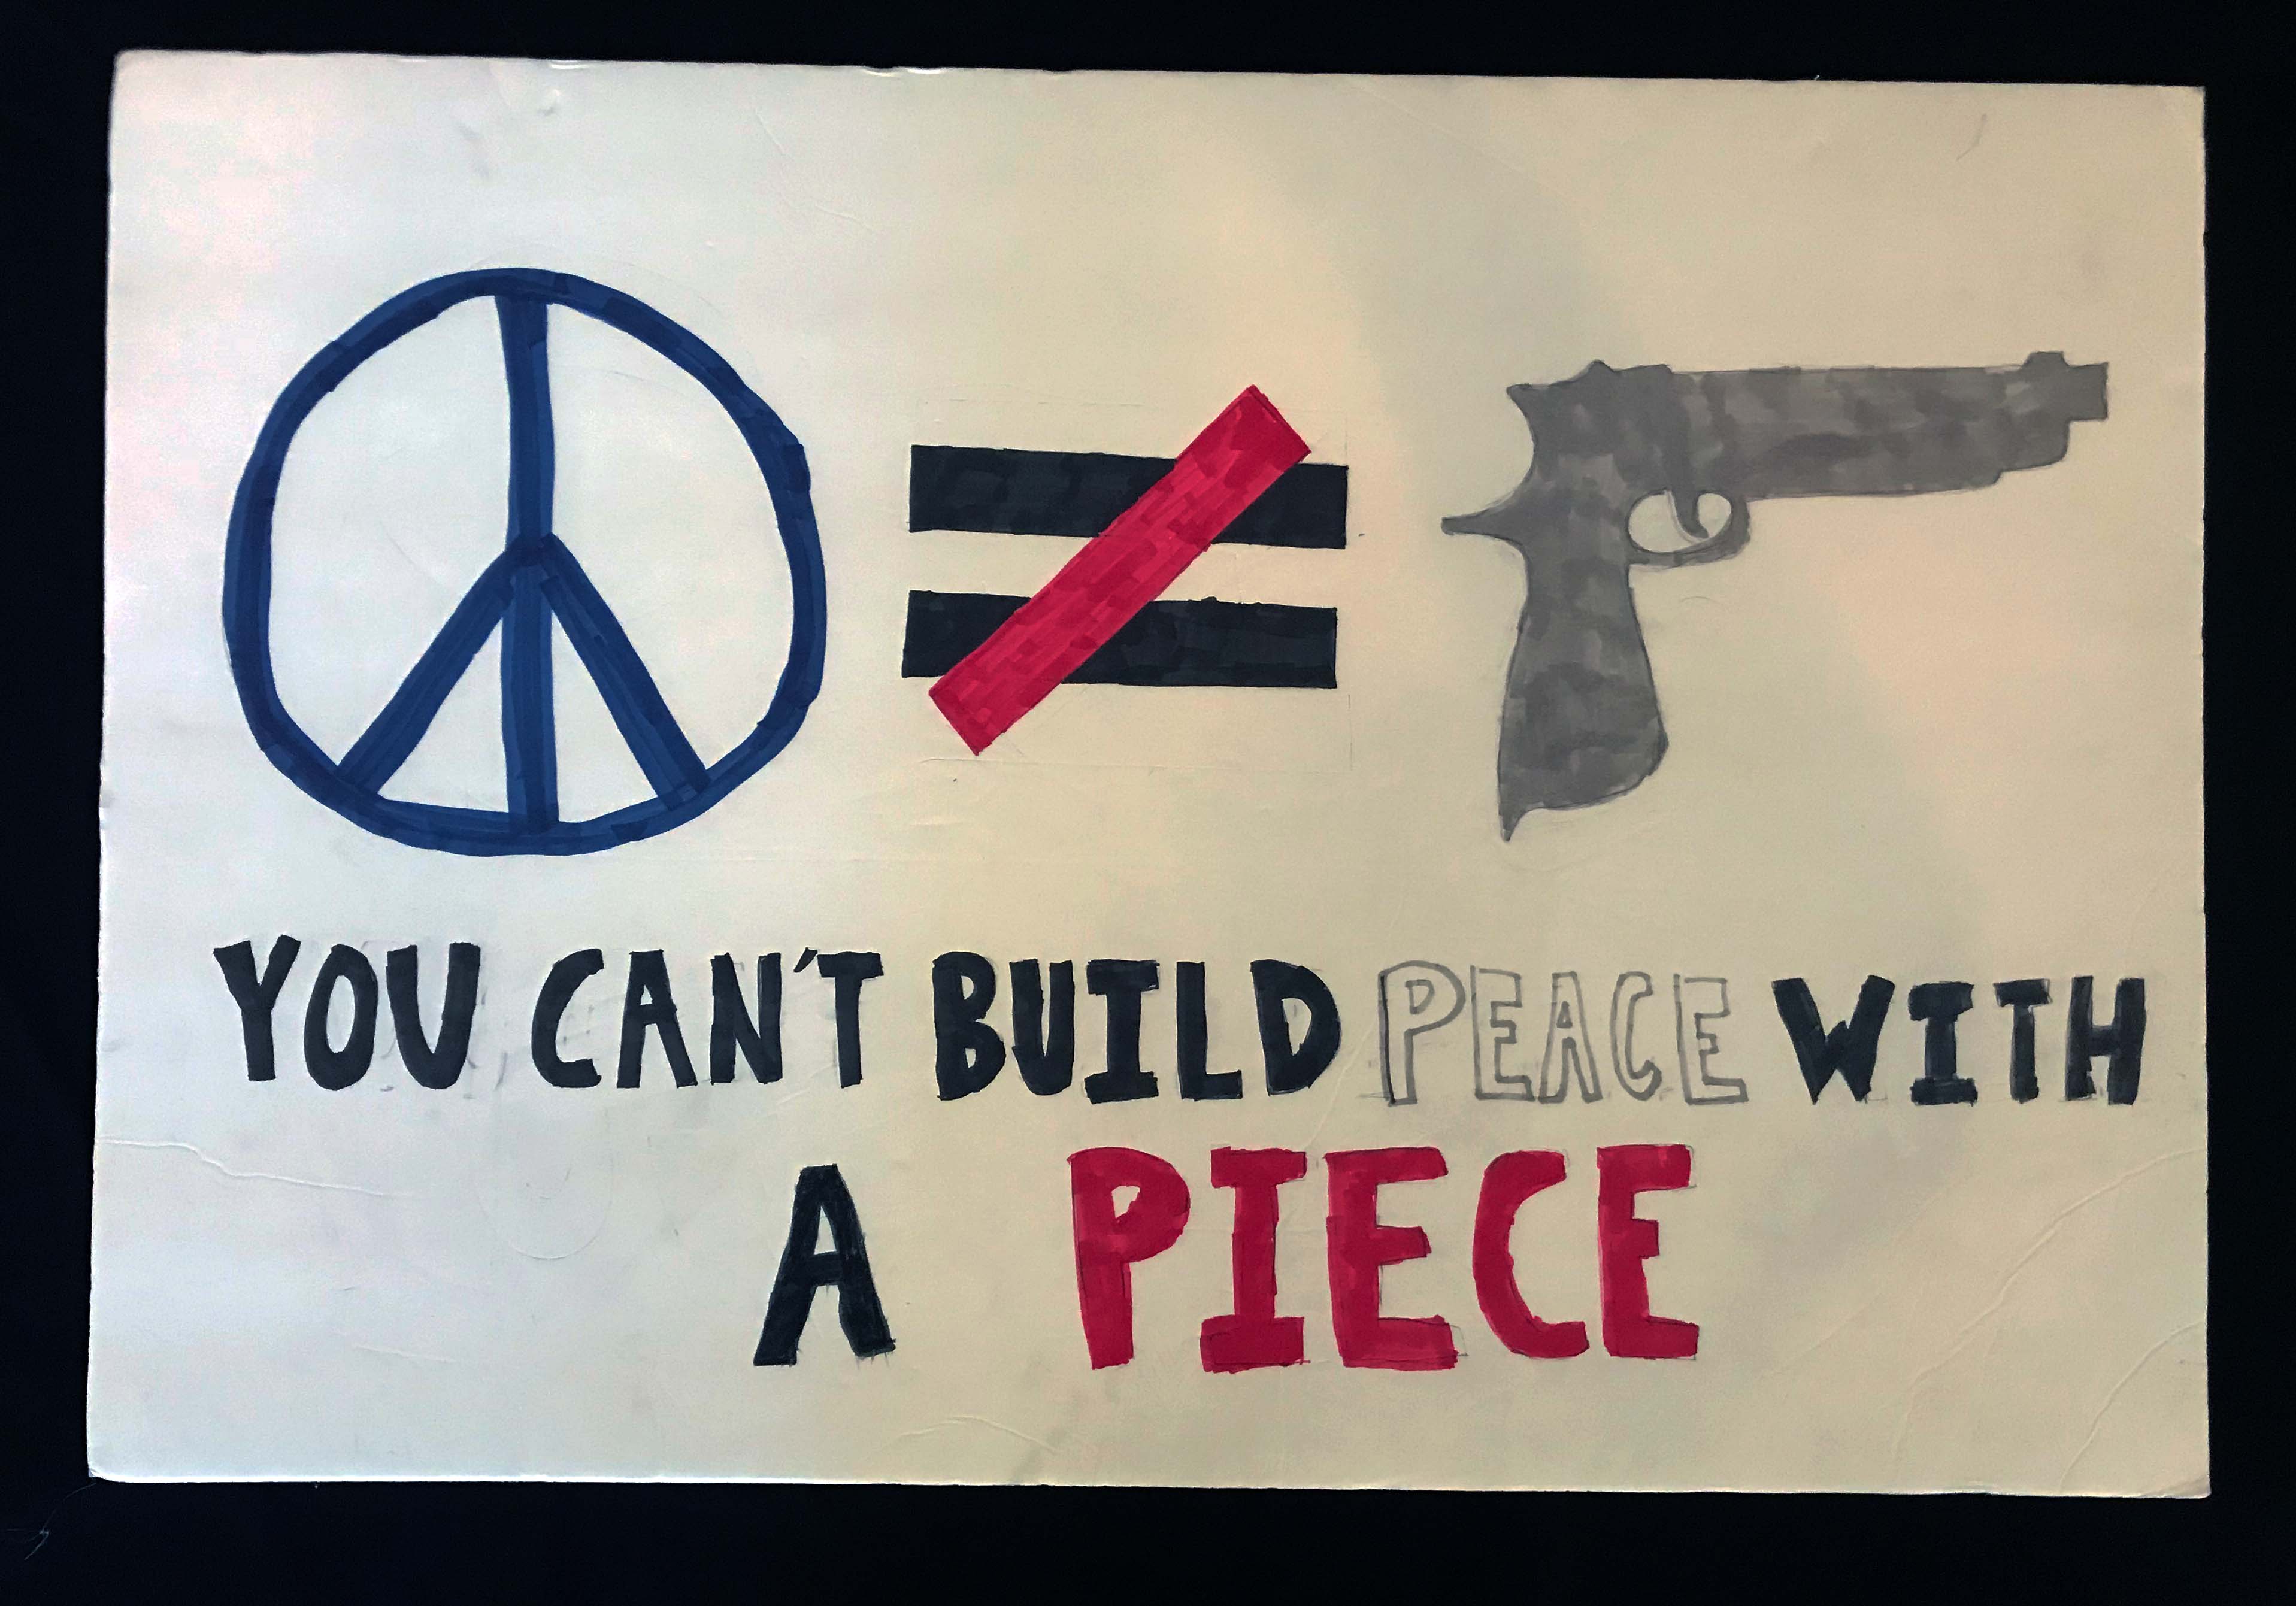 Charlotte March for Our Lives, 2018. Sign reads: "You can't build peace with a piece."